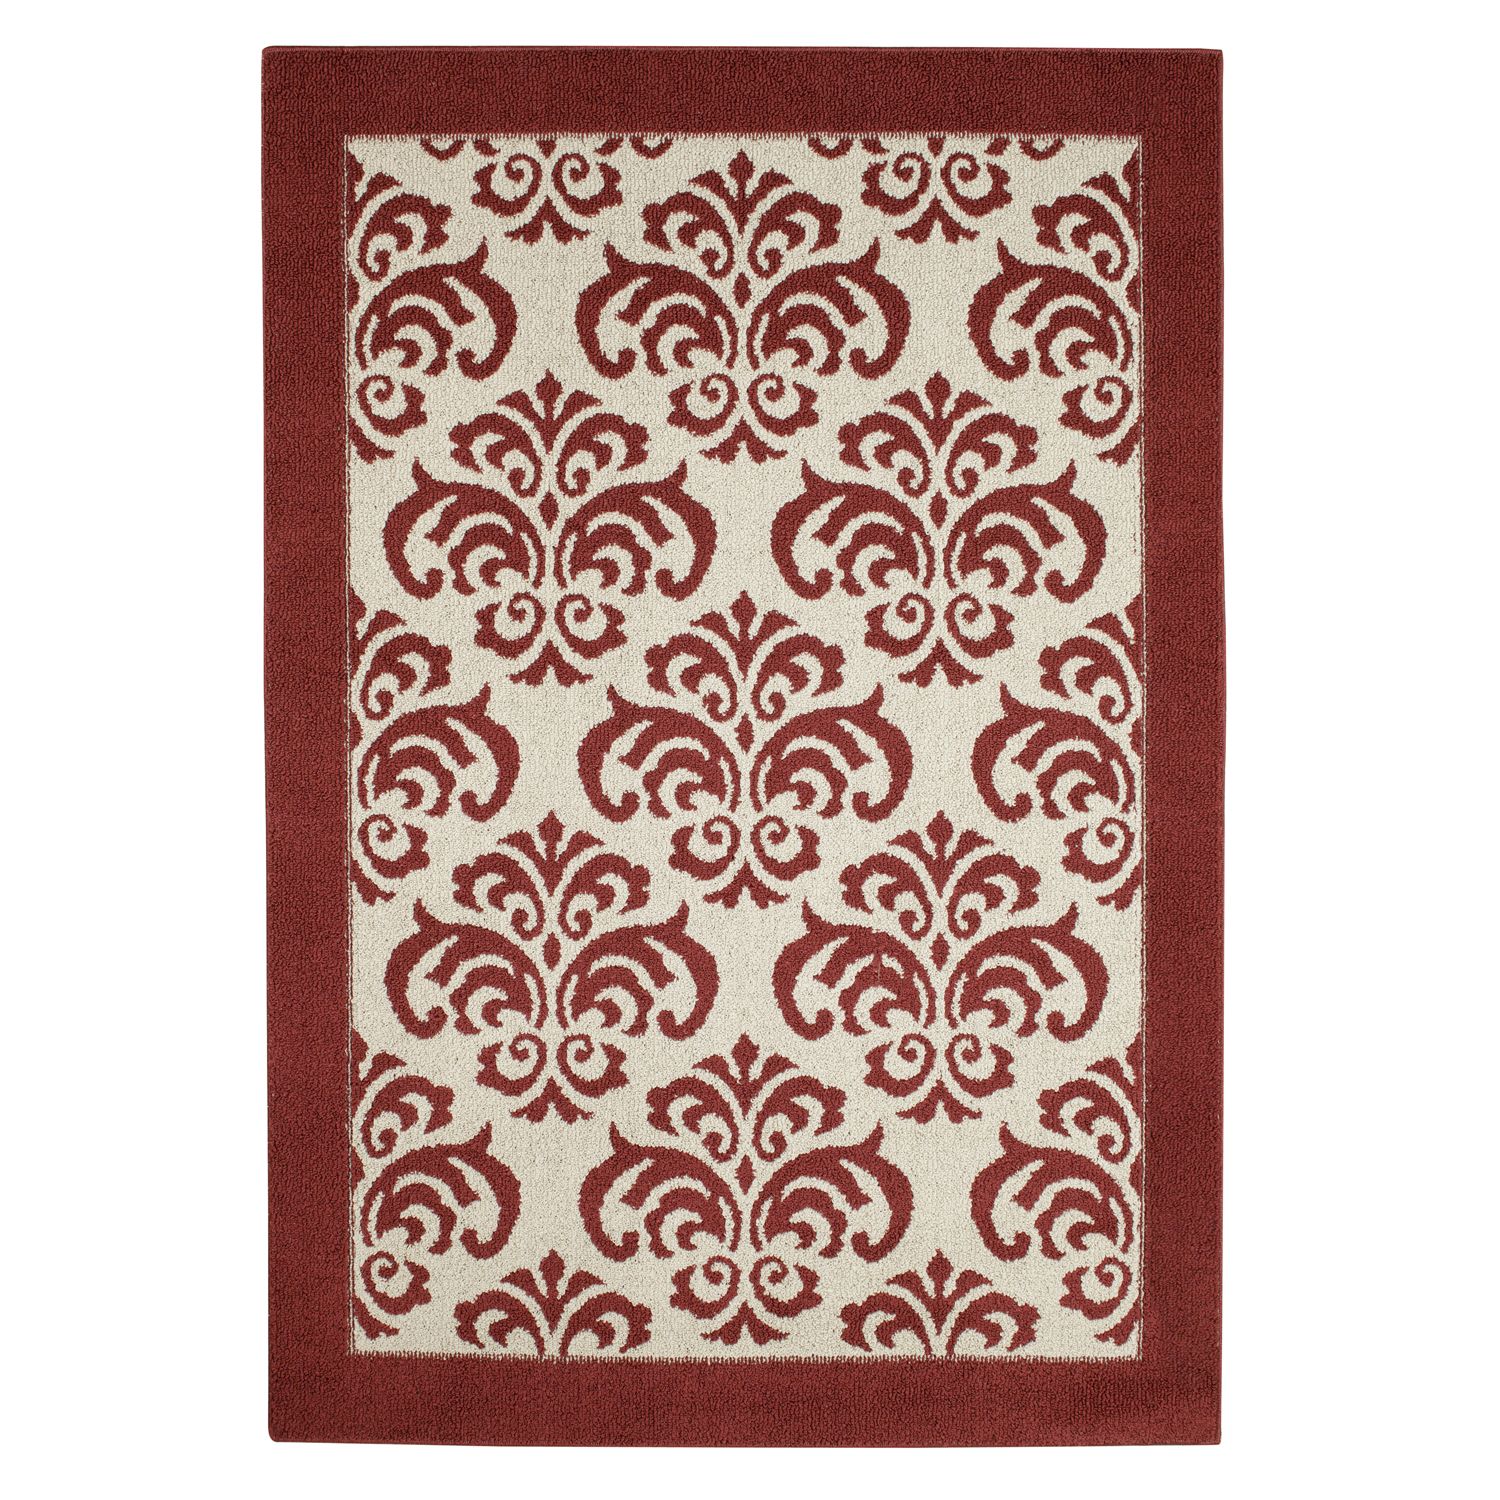 Essential Home English Red Burgundy Sand